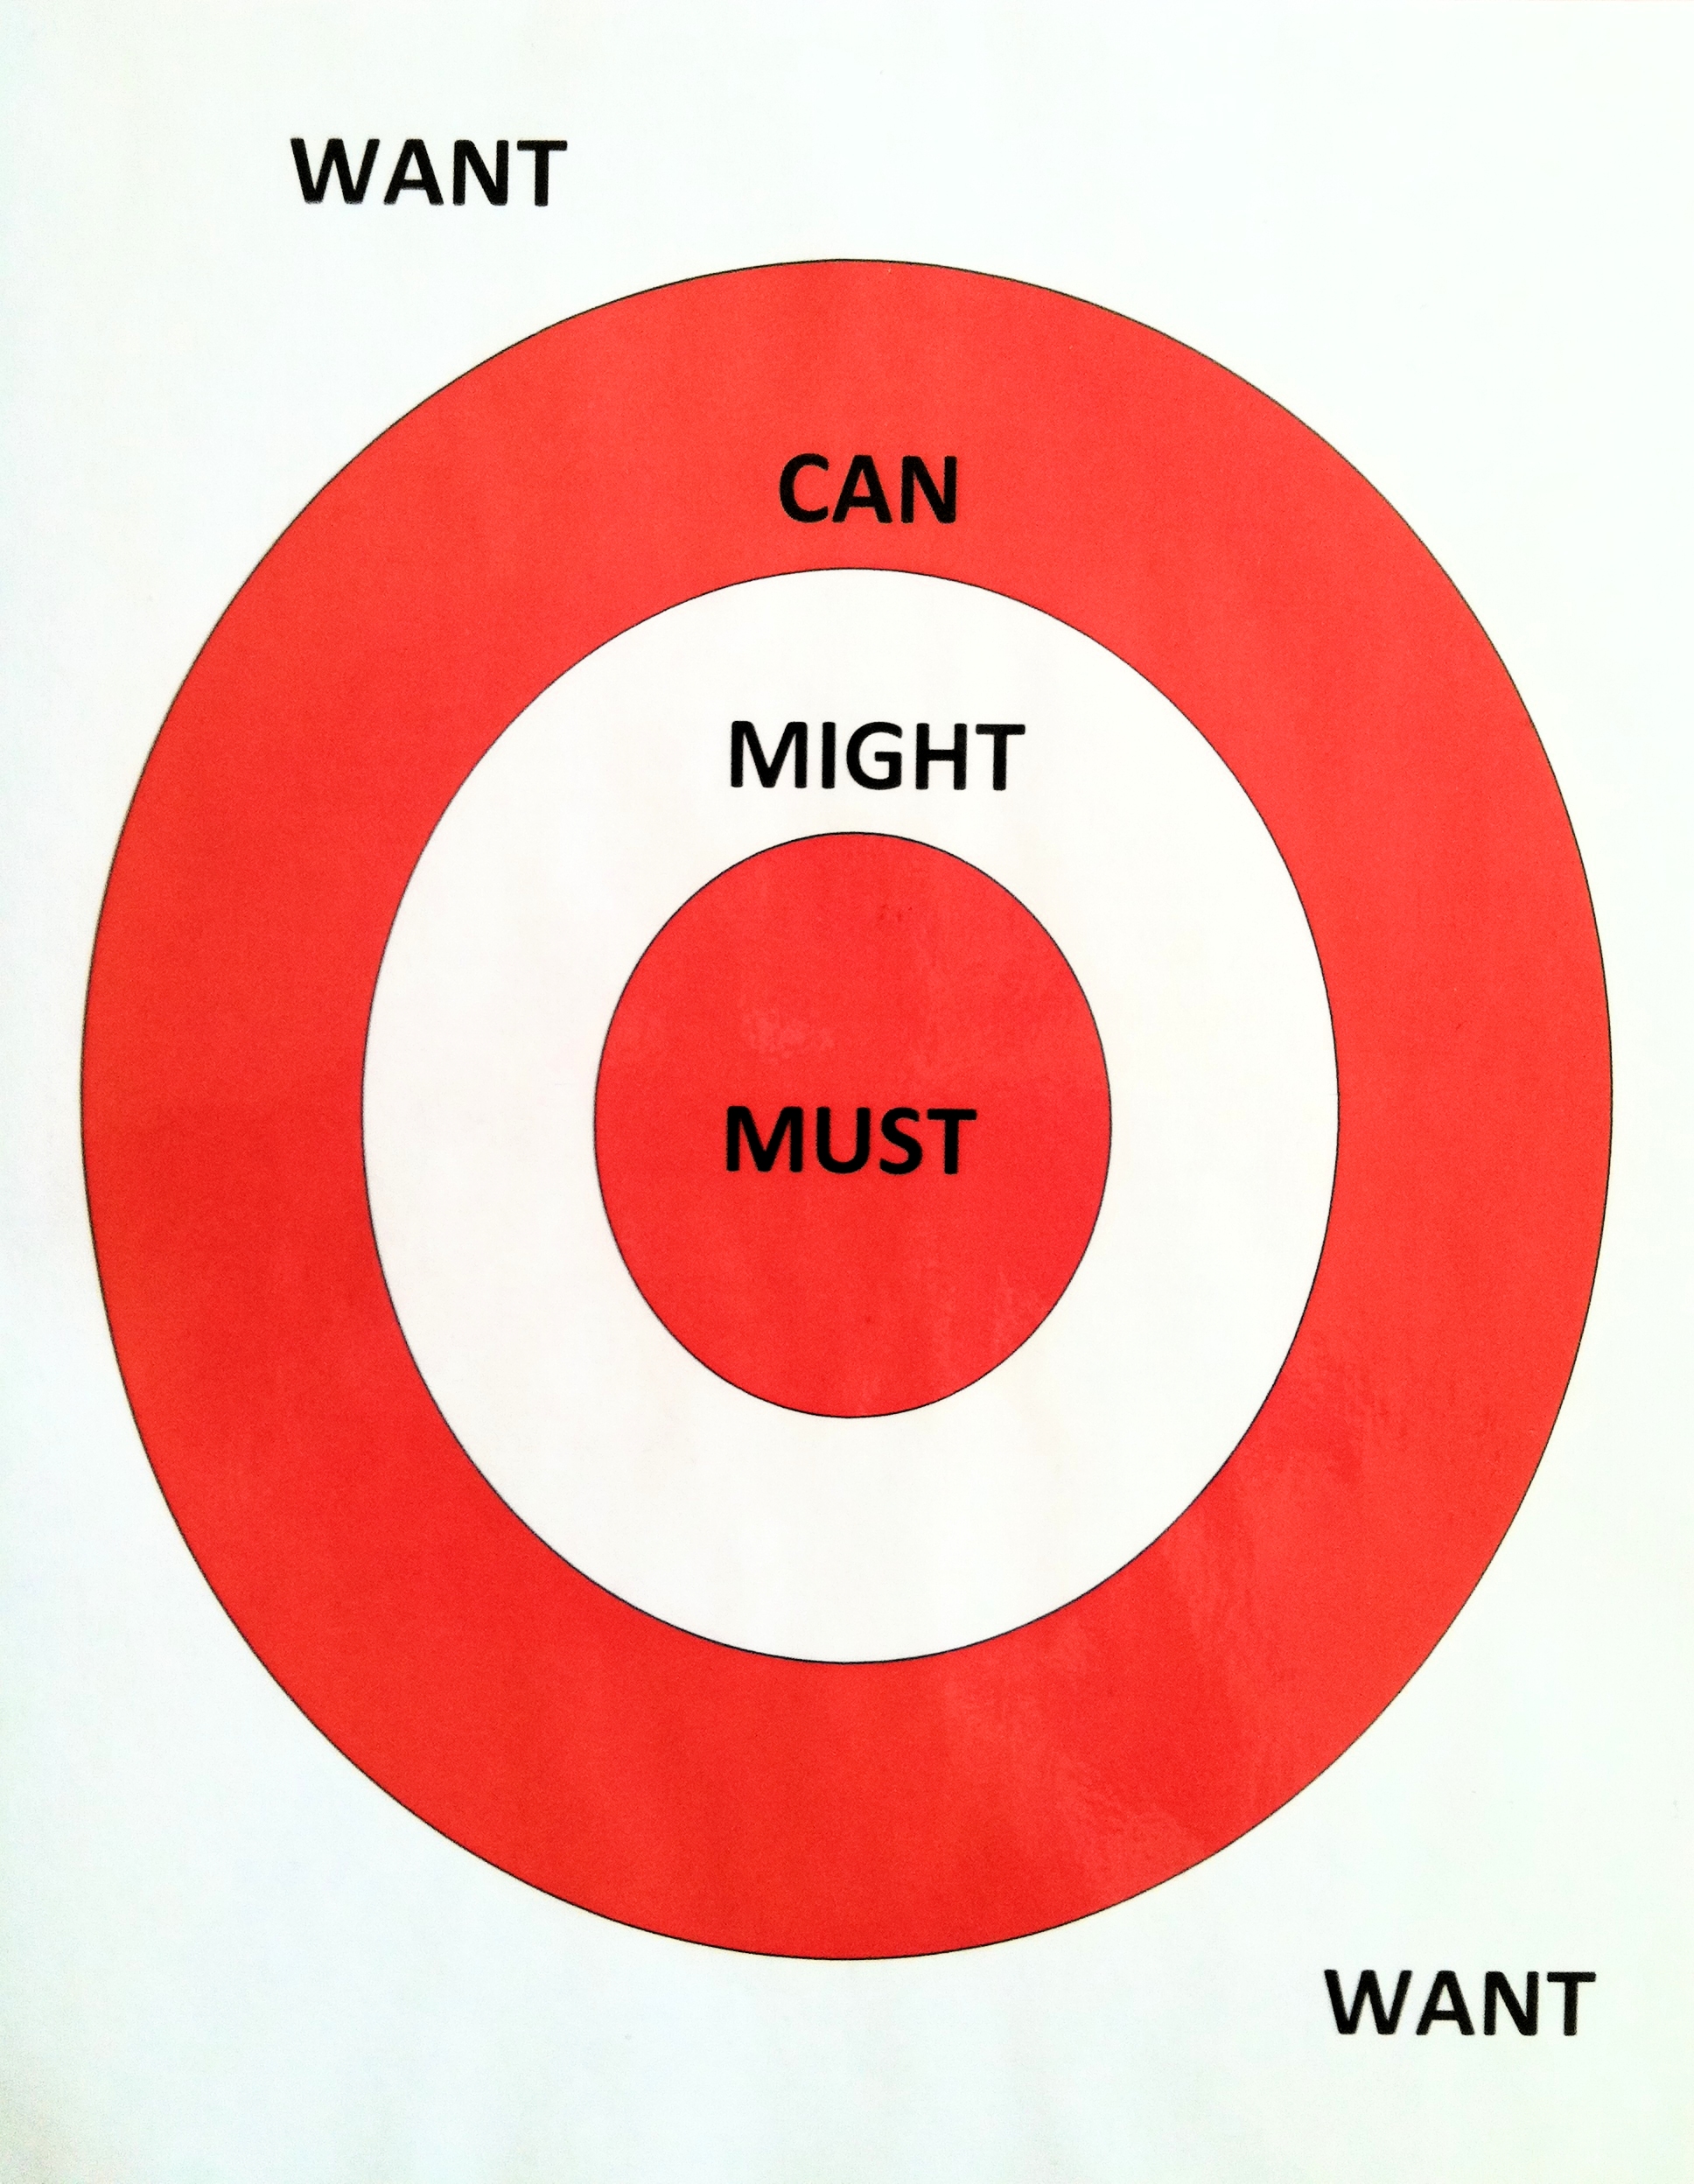 Blank Target: MUST, MIGHT, CAN, WANT